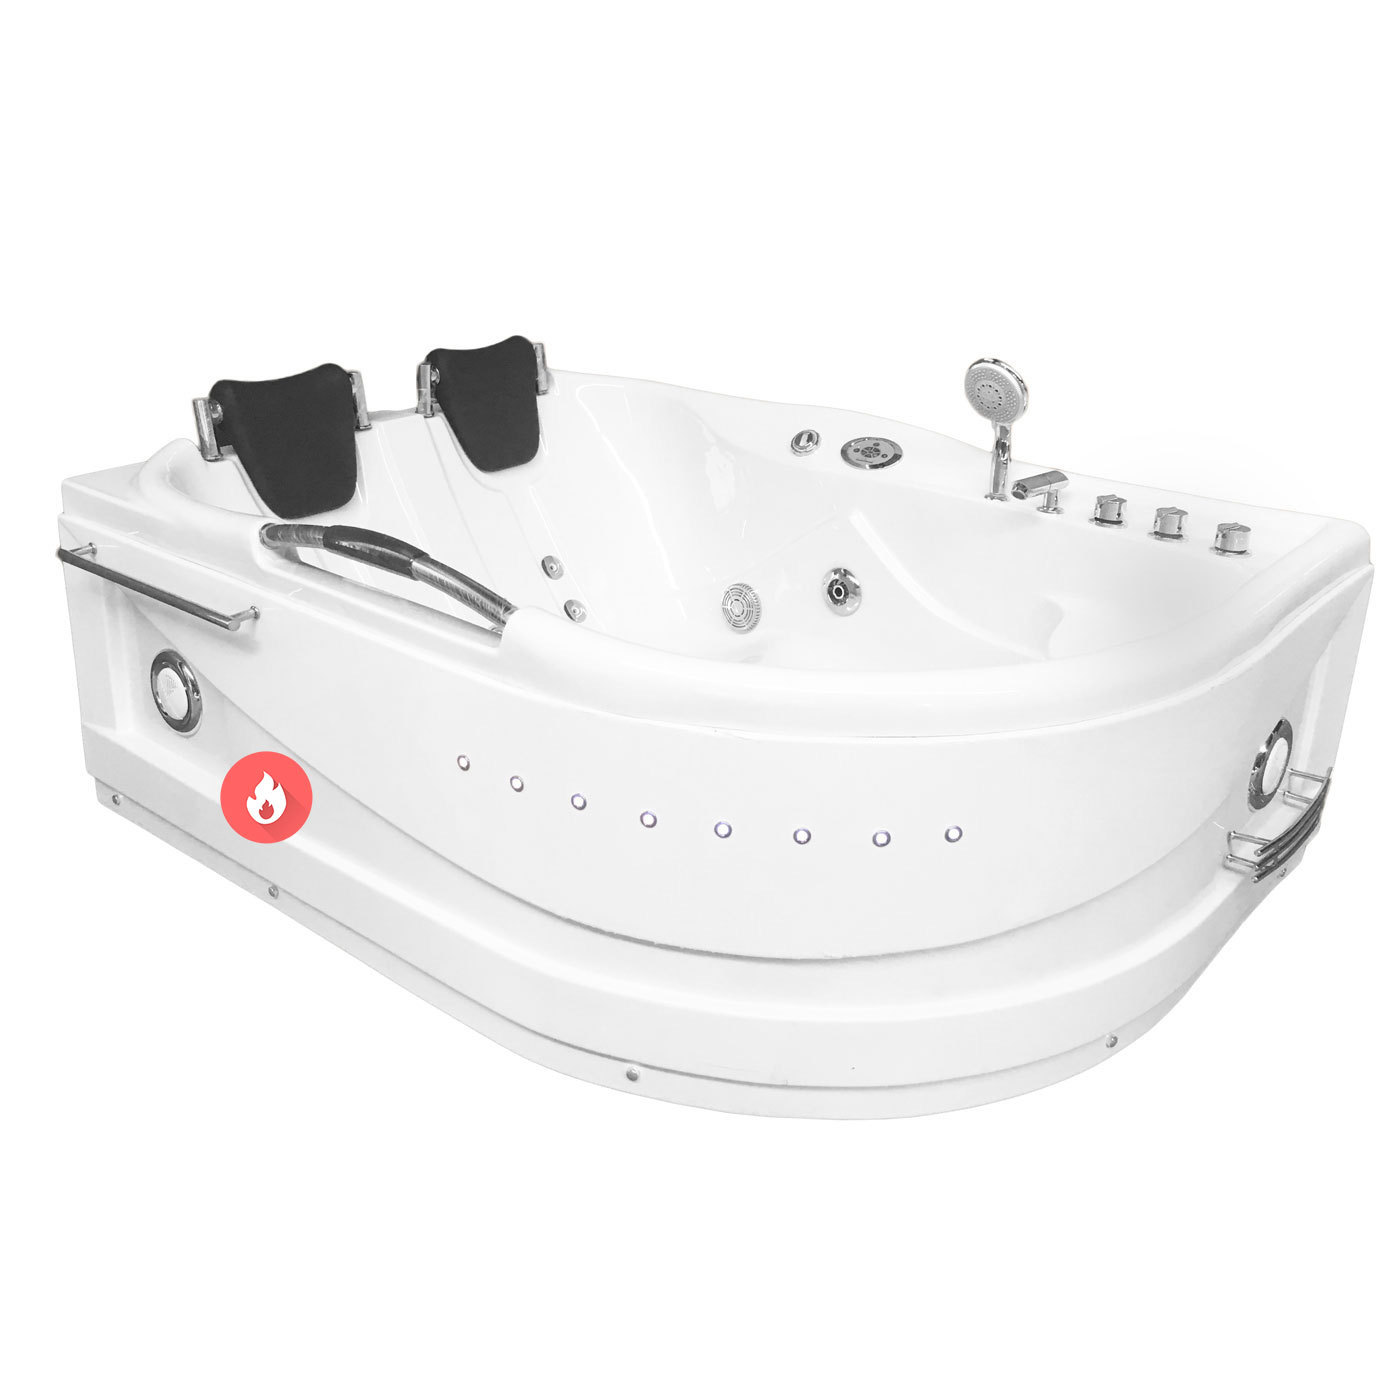 Primary image for Whirlpool massage hydrotherapy bathtub hot tub 2 person CAYMAN with Heater